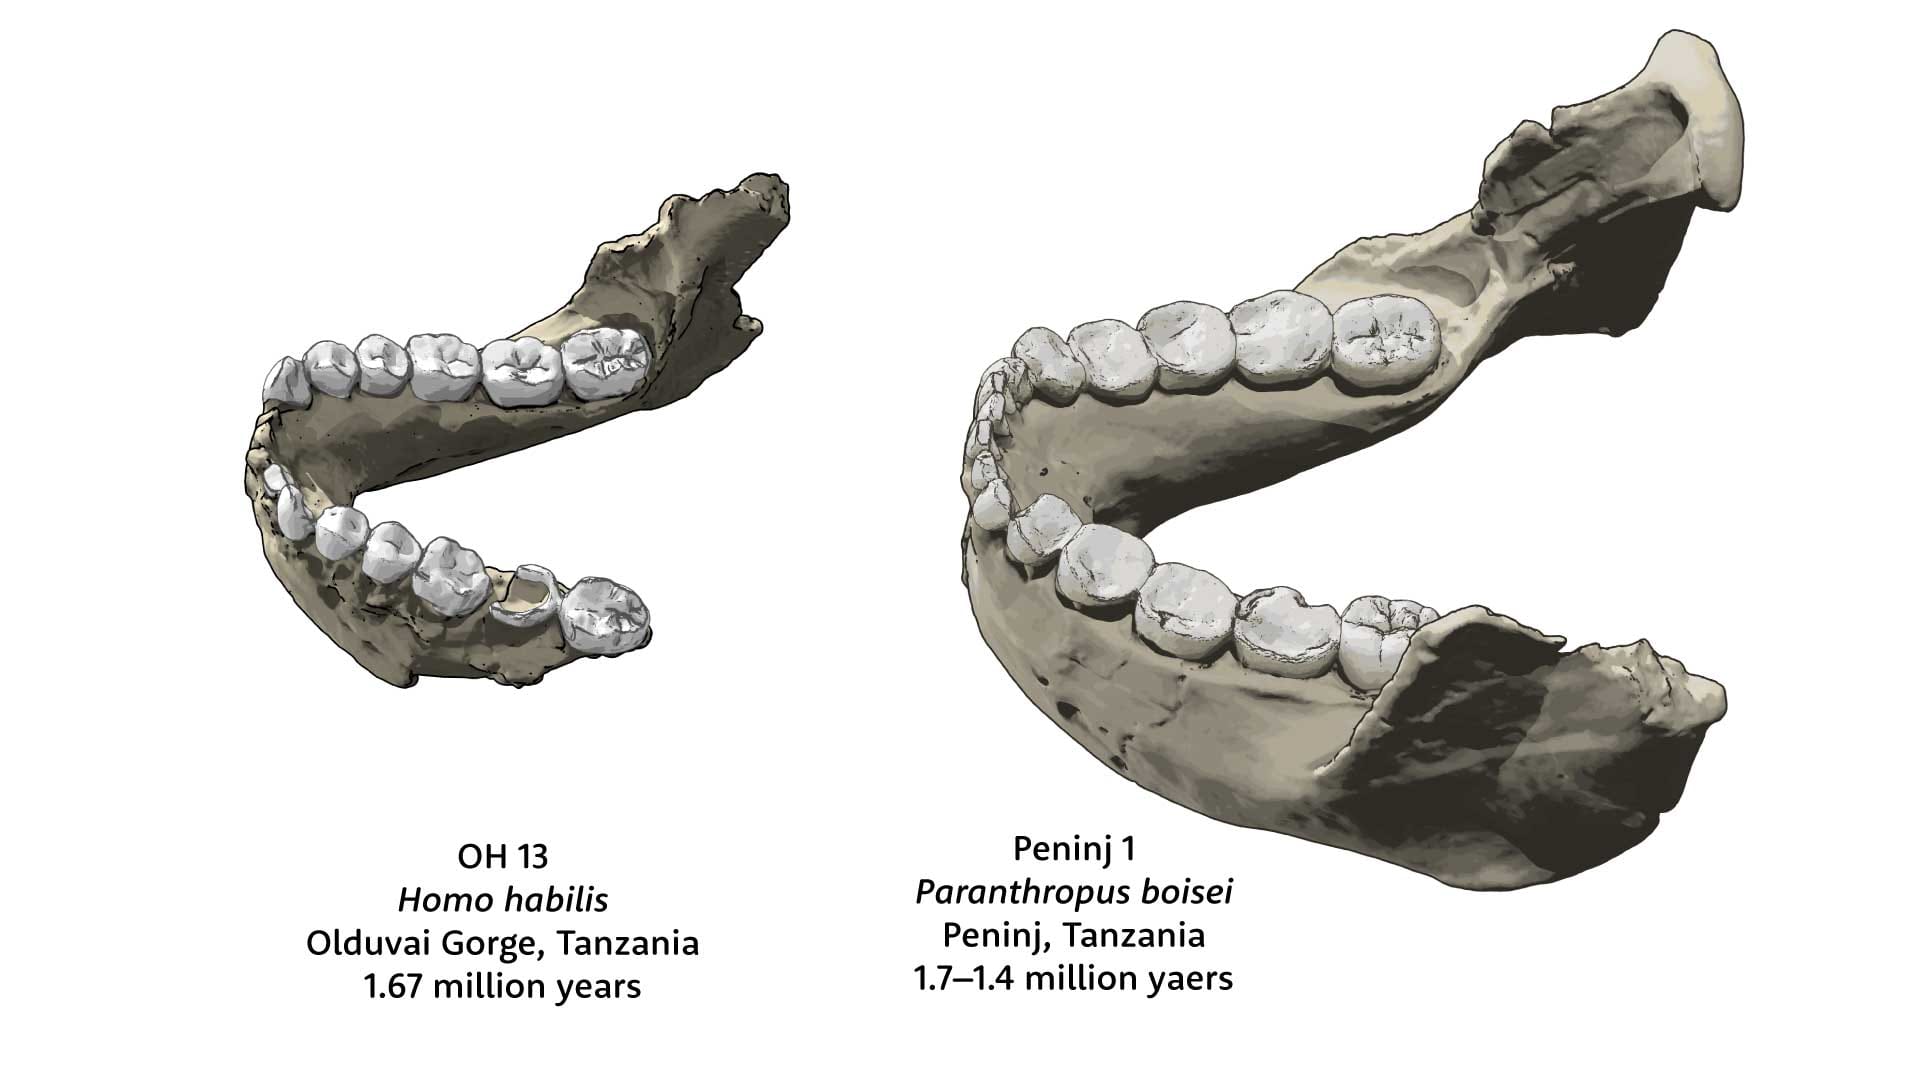 Views of the mandible of OH 13, Homo habilis, on the left and Peninj 1, Paranthropus boisei, on the right